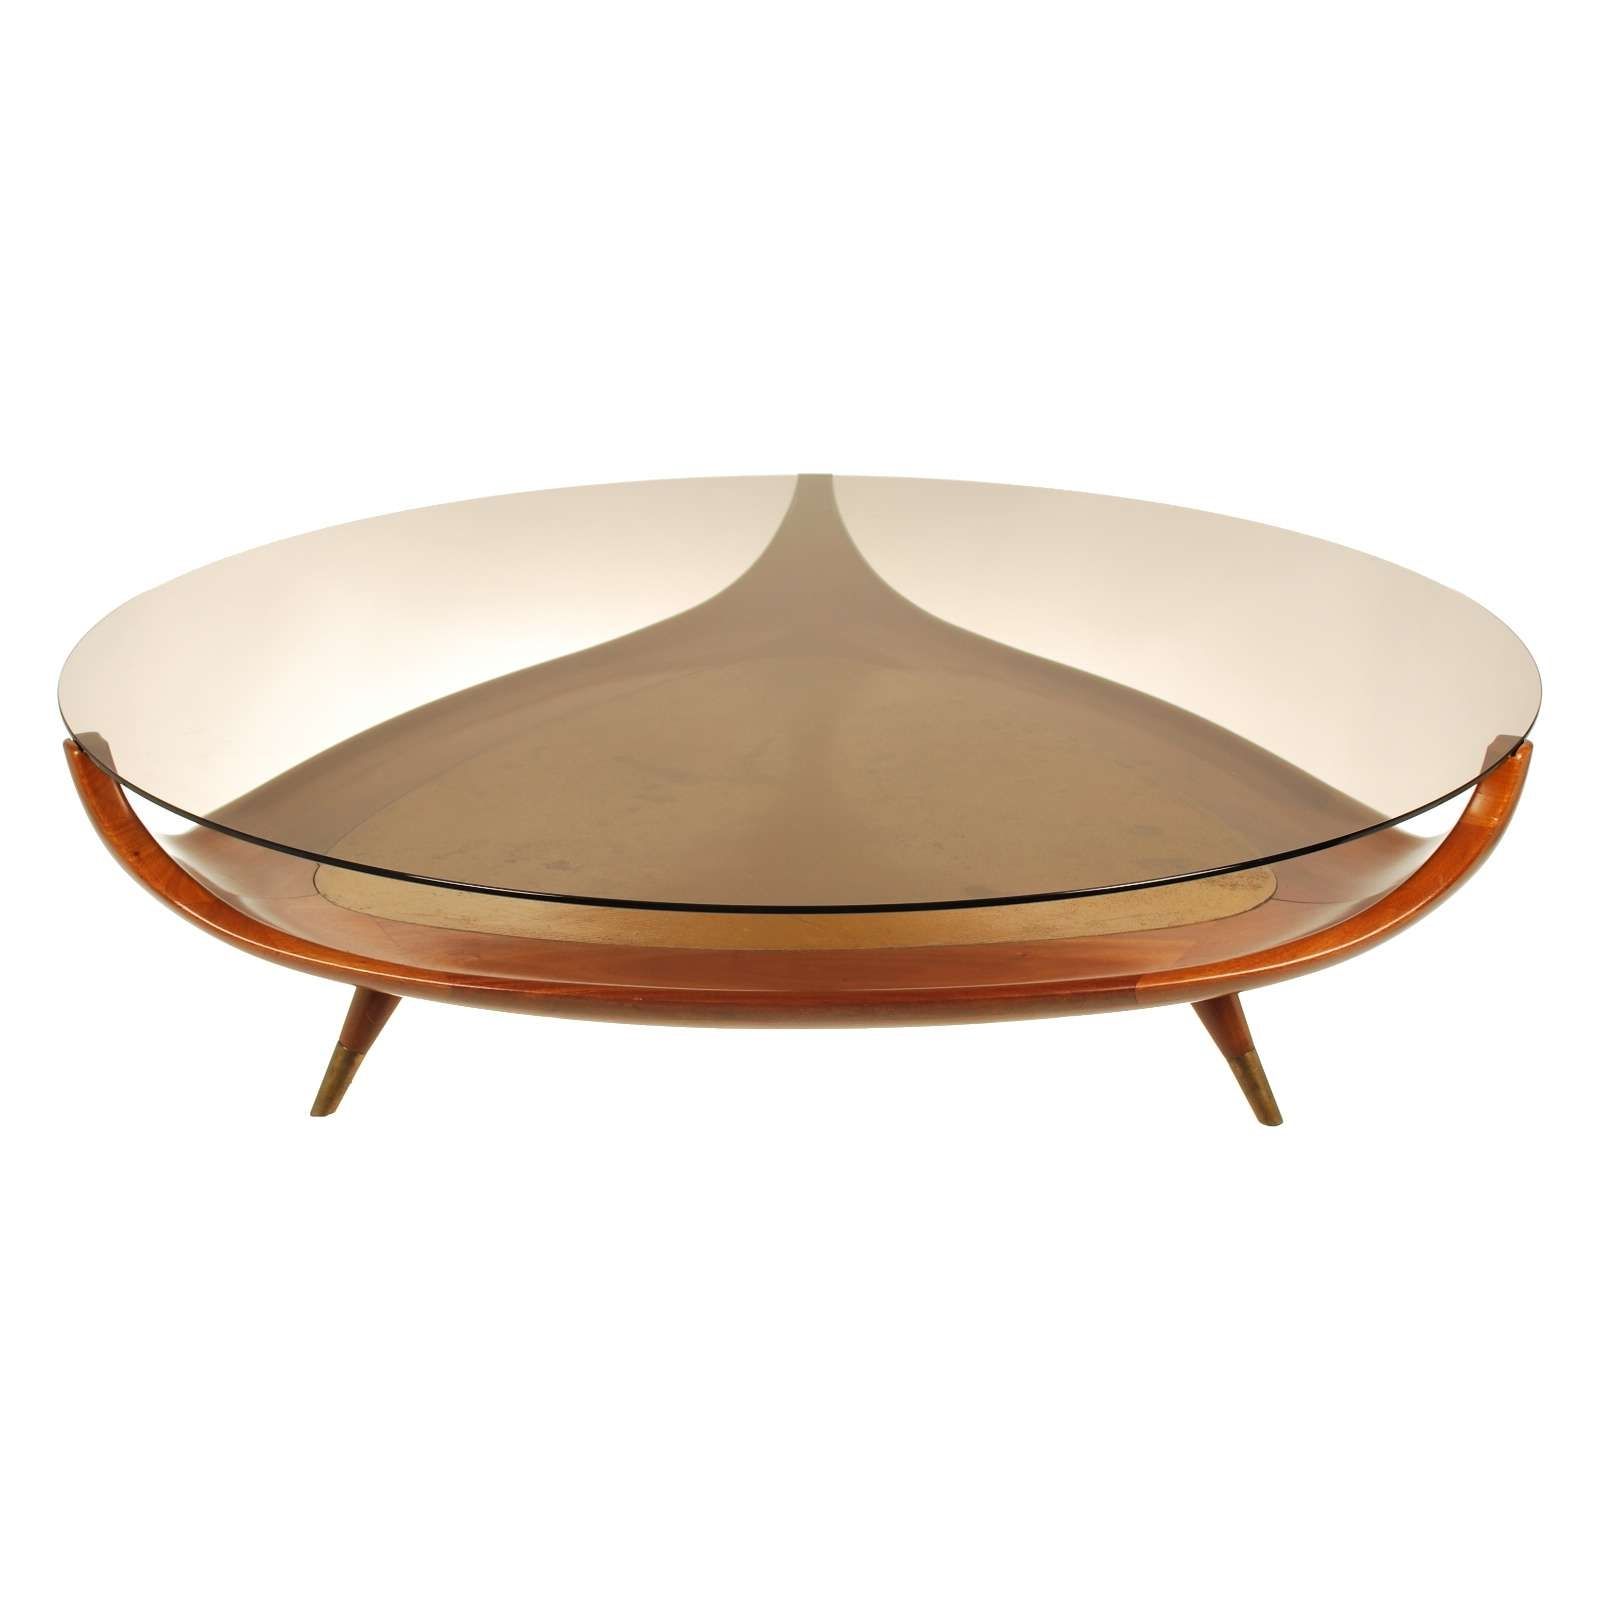 Popular Contemporary Round Coffee Tables Throughout Coffee Table Contemporary Round Coffee Table Glamour Of Tables (View 14 of 20)